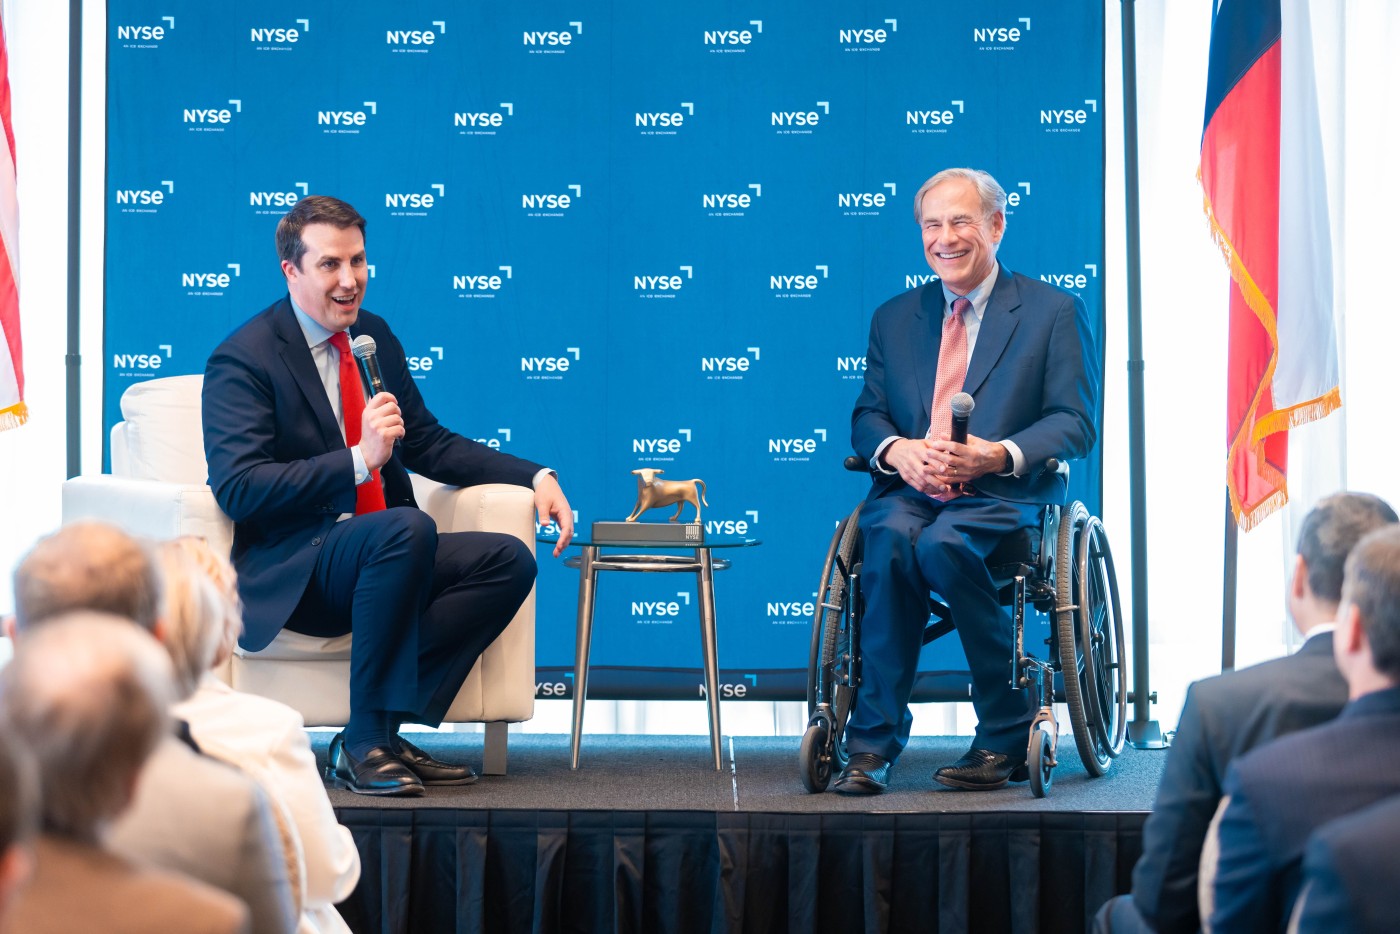 Governor Abbott Highlights Texas’ Business-Friendly Environment in NYSE Fireside Chat